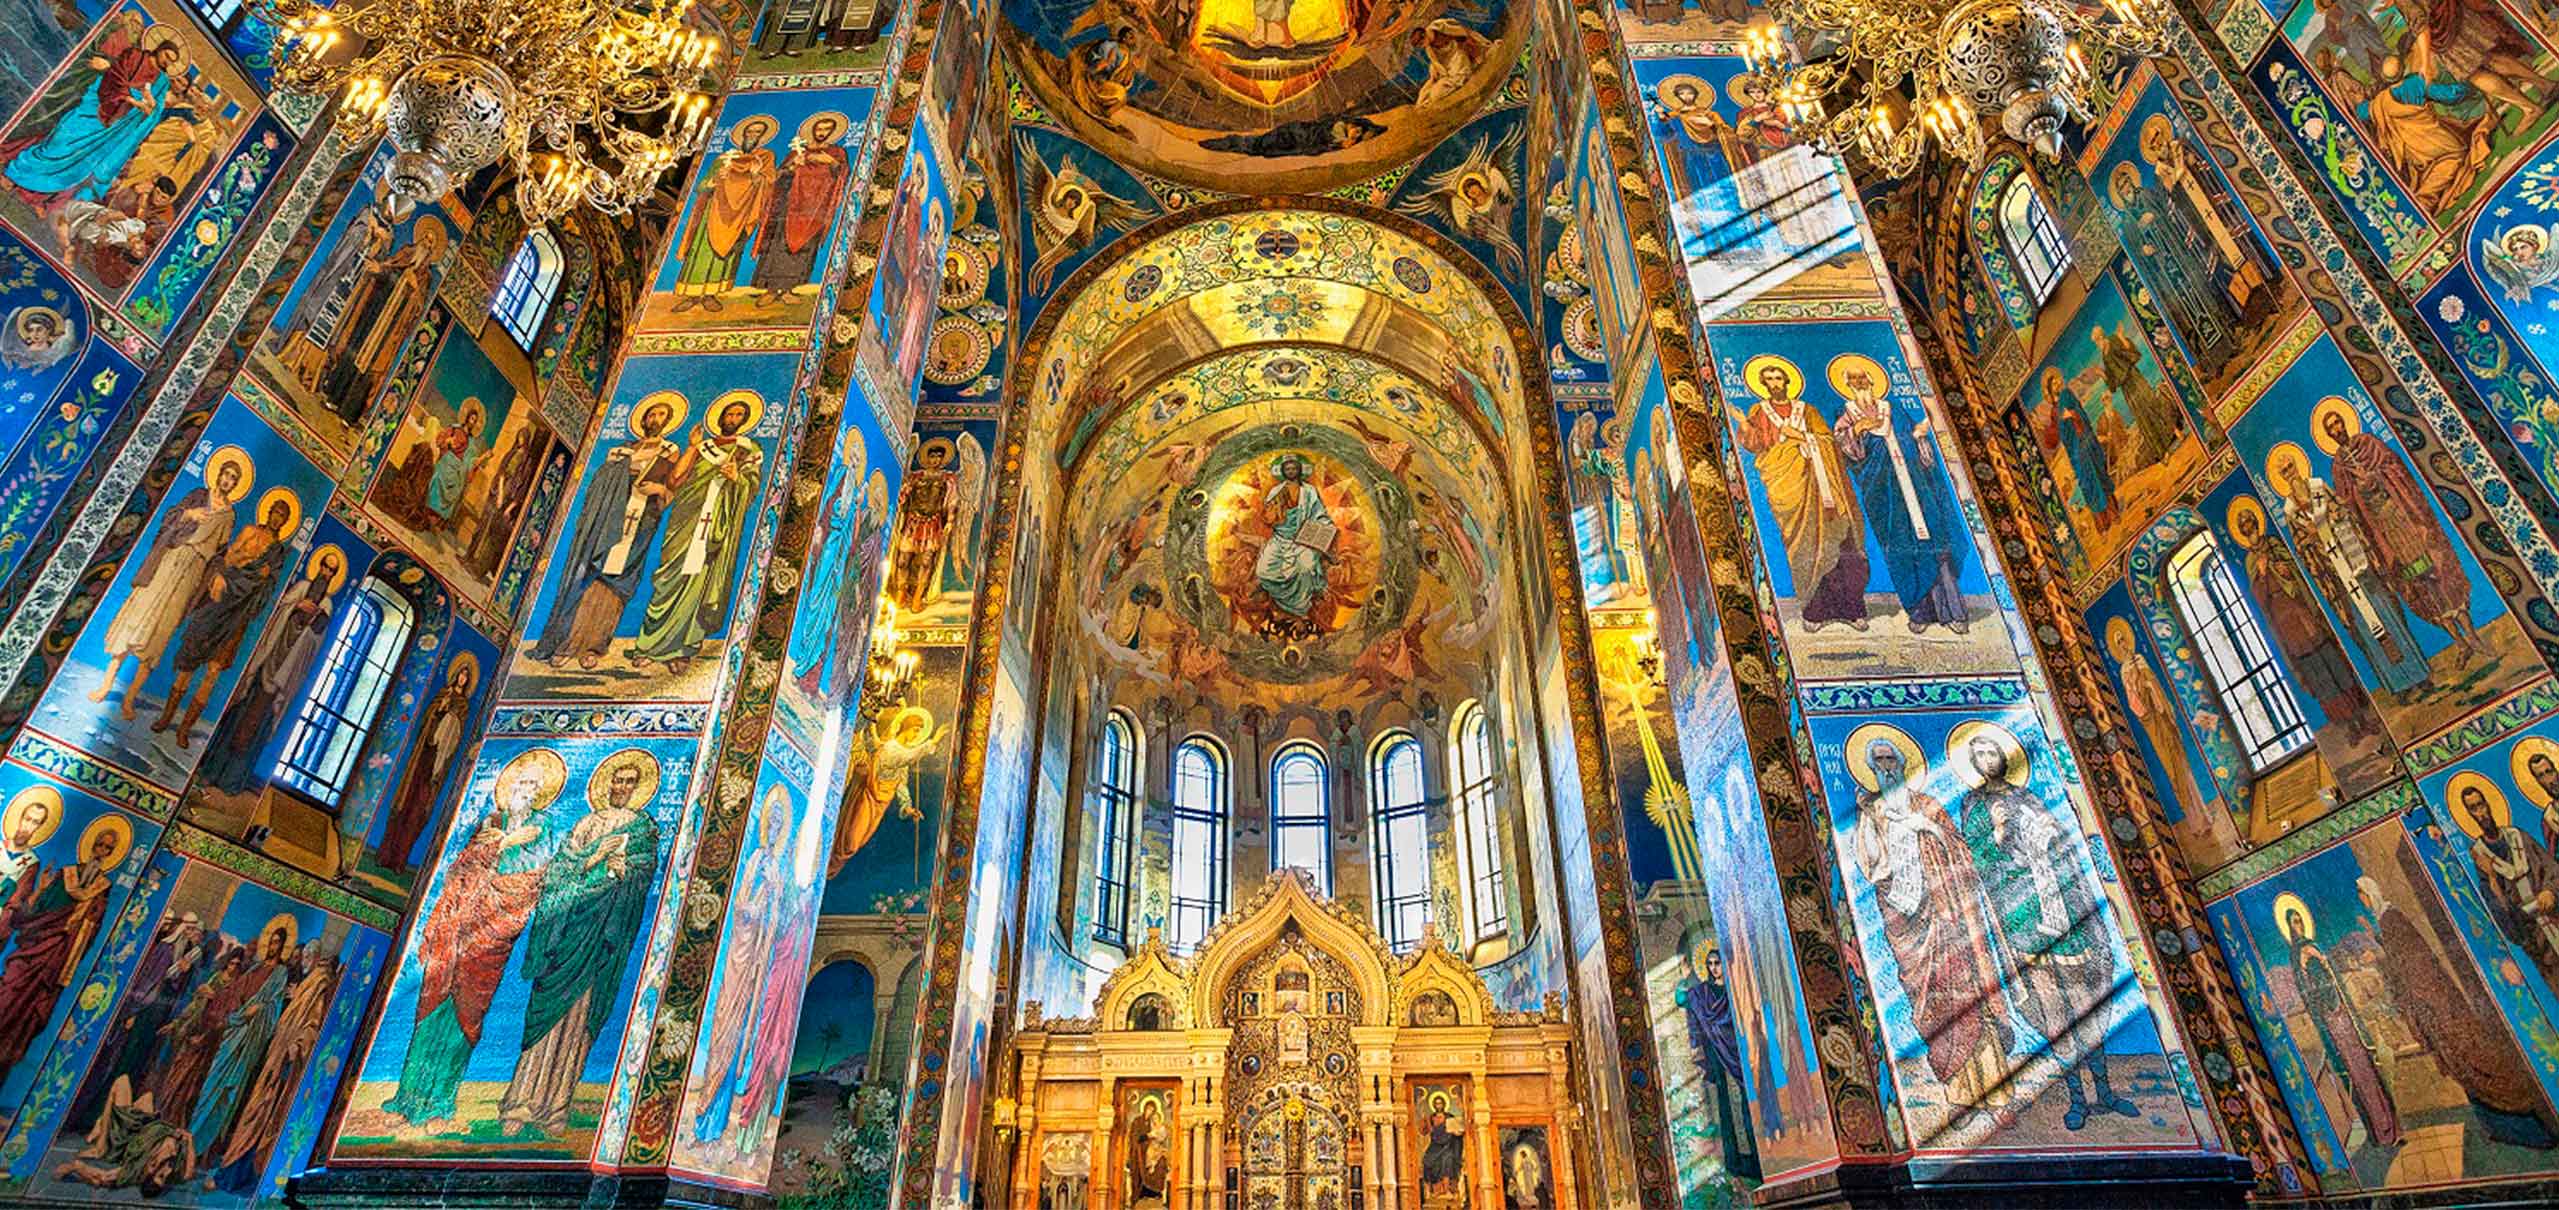 Panoramic Tour with visit to the Church of our Savior on Spilled Blood 3